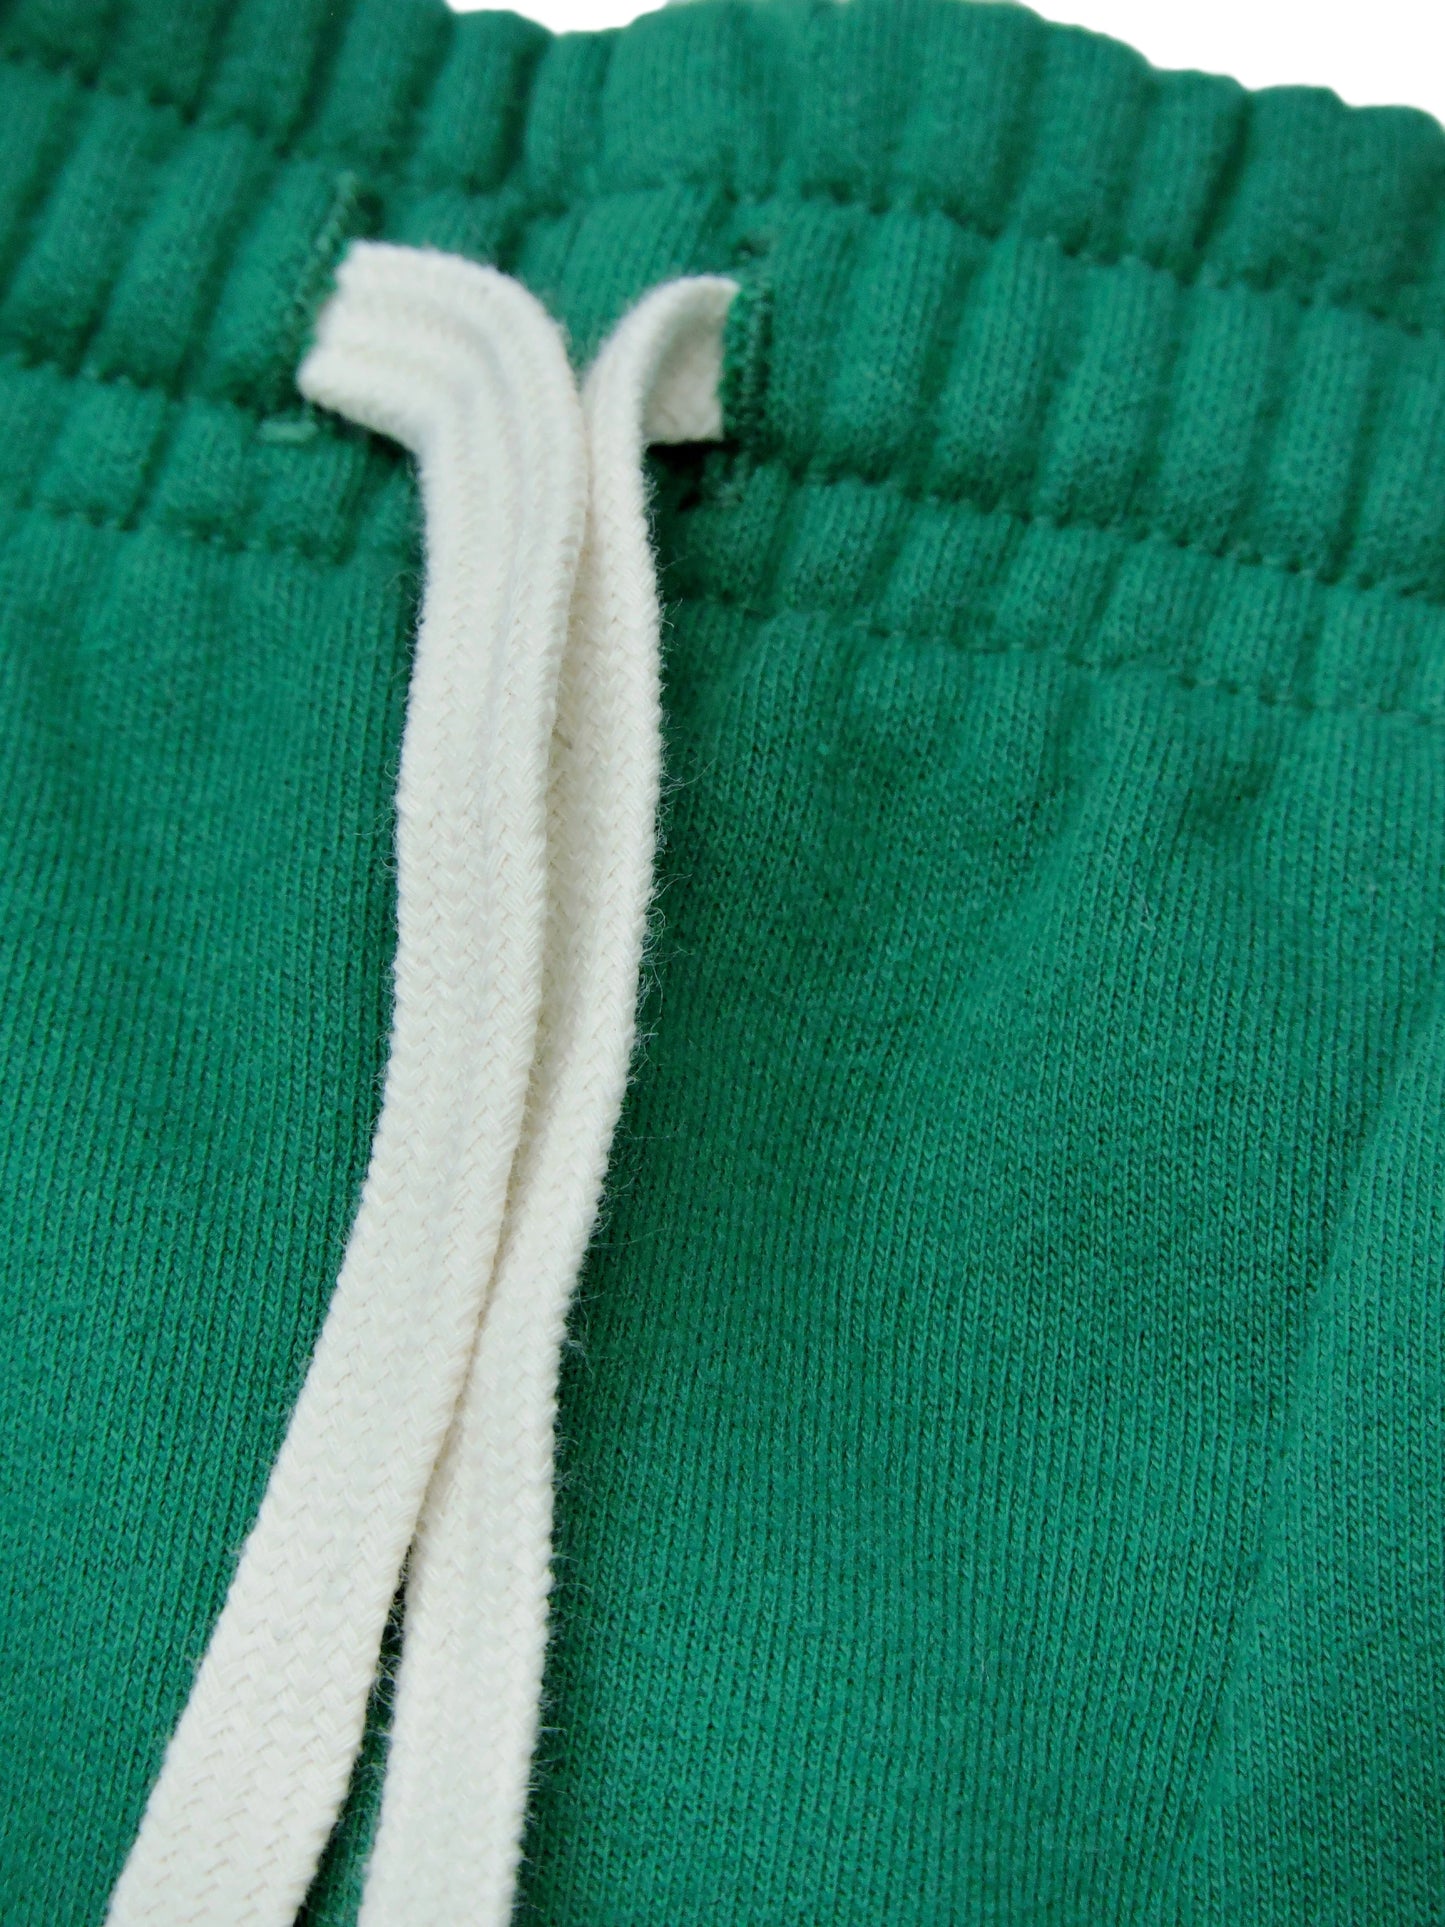 Close up of drawstrings and green cotton fabric